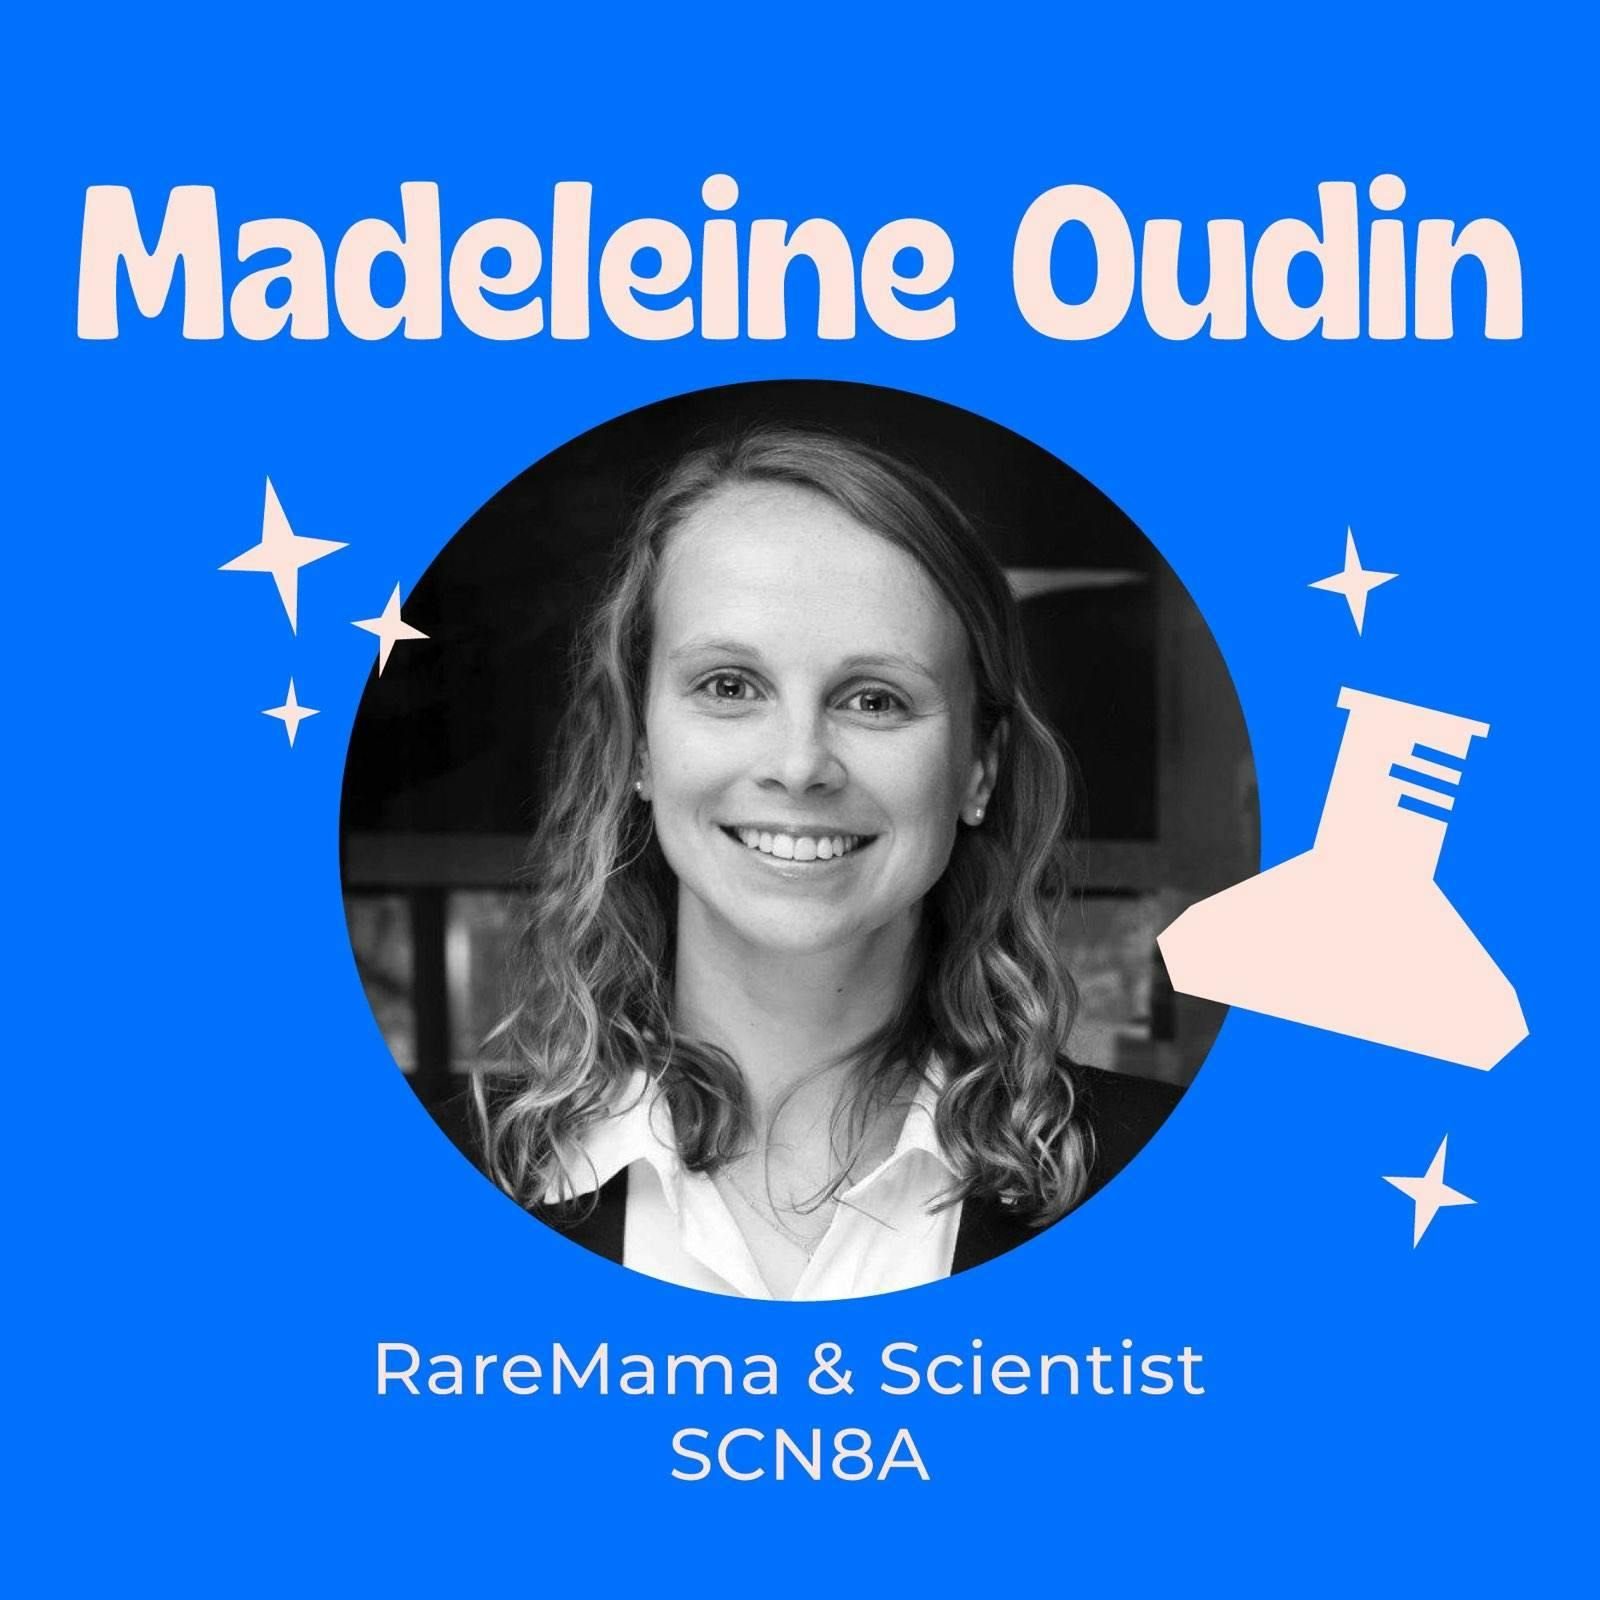 From Cancer Biologist to Rare Disease Mom – Digging Into the Data to Better Understand SCN8A with Madeleine Oudin PhD – Professor of Biomedical Engineering at Tufts